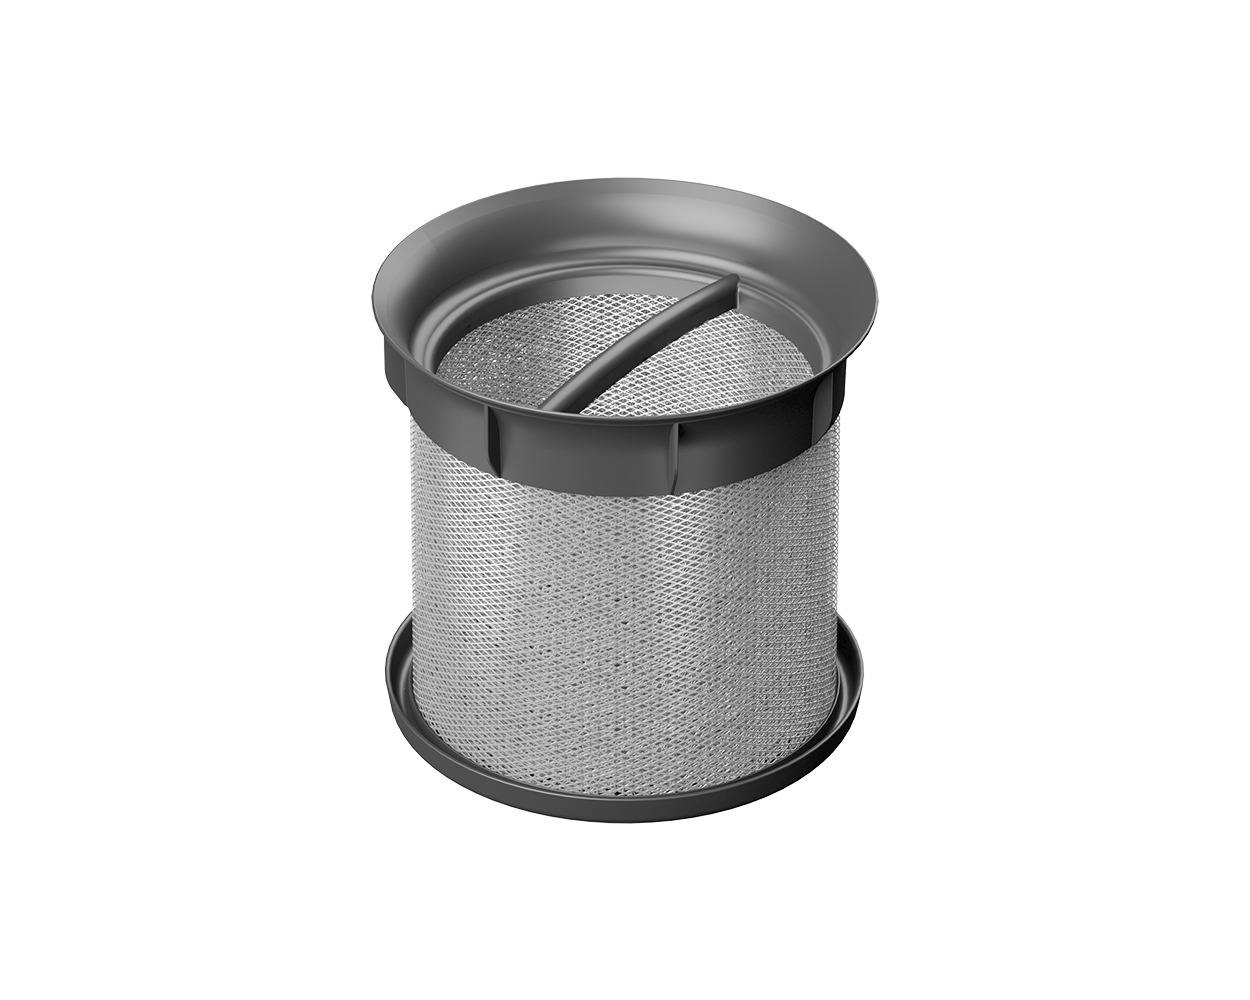 Bora Pure Stainless Steel Grease Filter, Sold in the UK by Krieder Studio